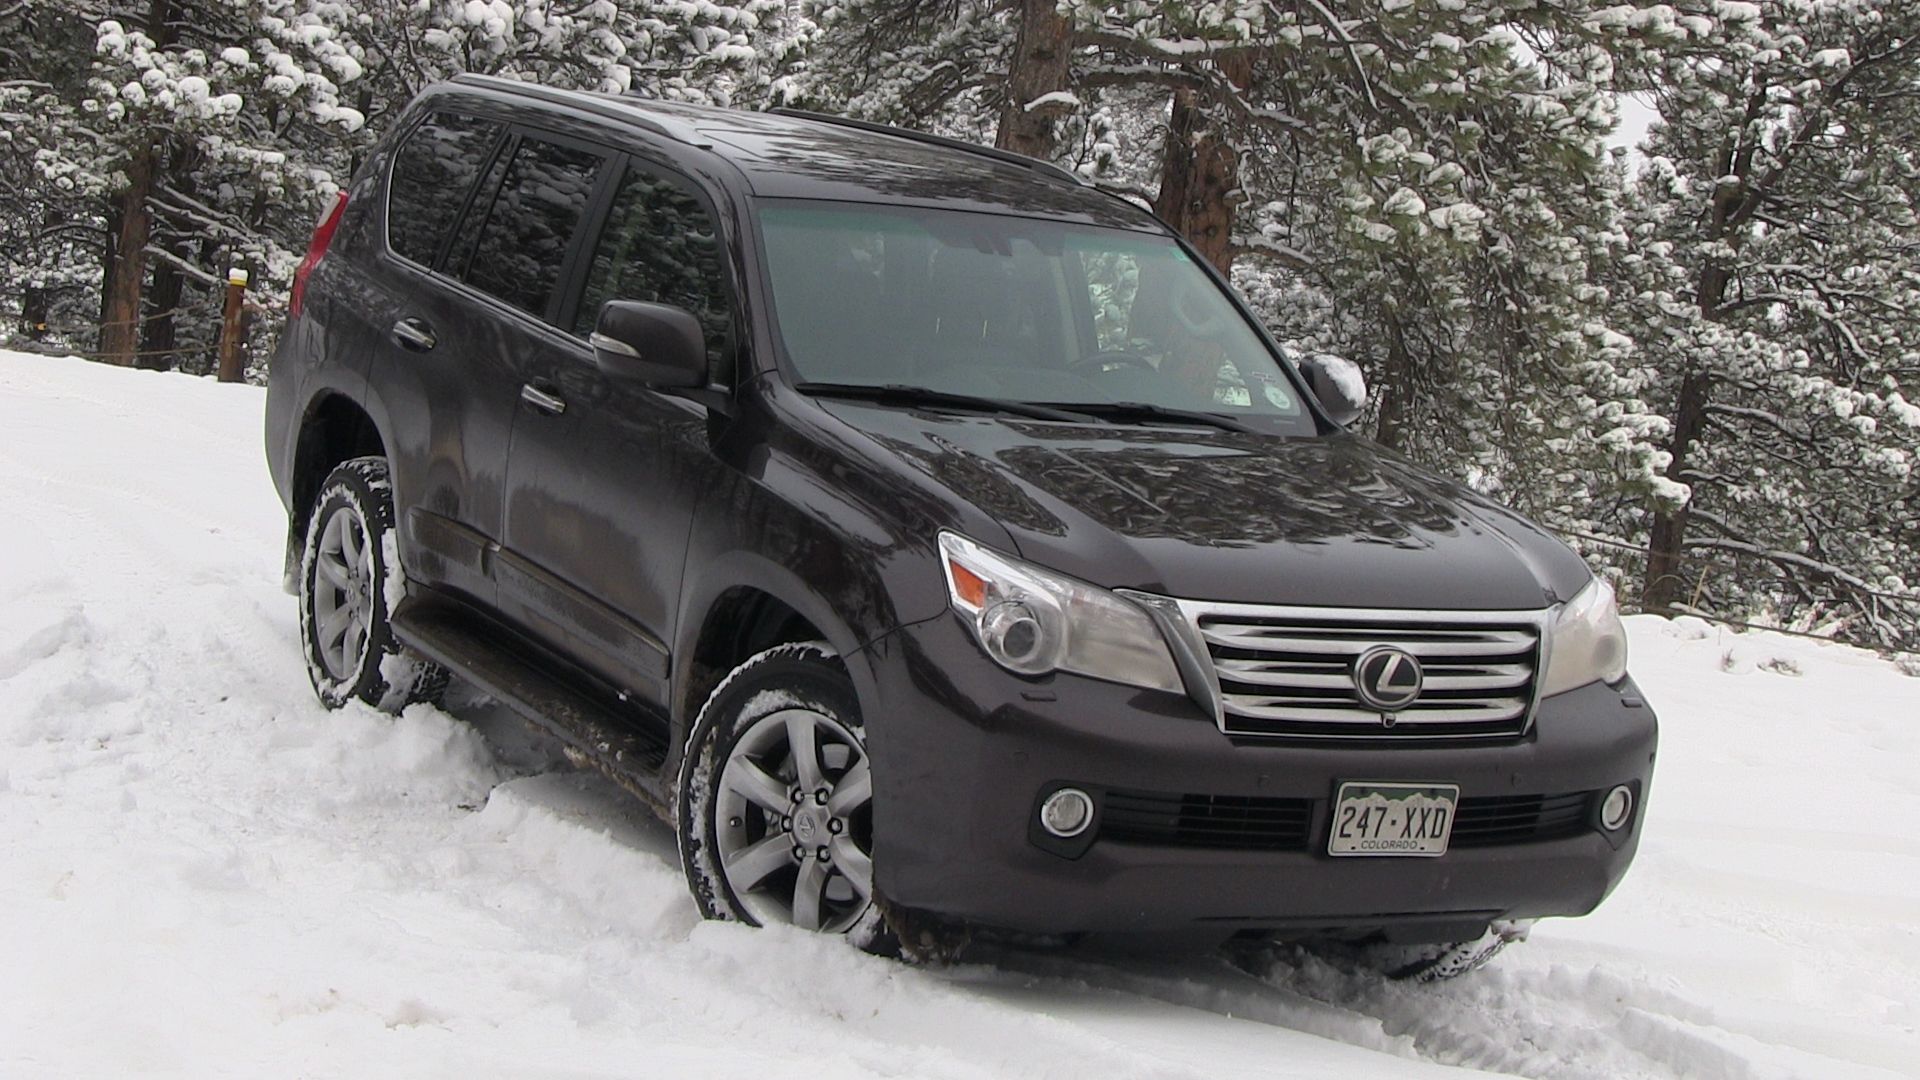 Review: 2013 Lexus GX 460 - Can Anything Stop this Luxury Off-Roader? |  TFLCar.com